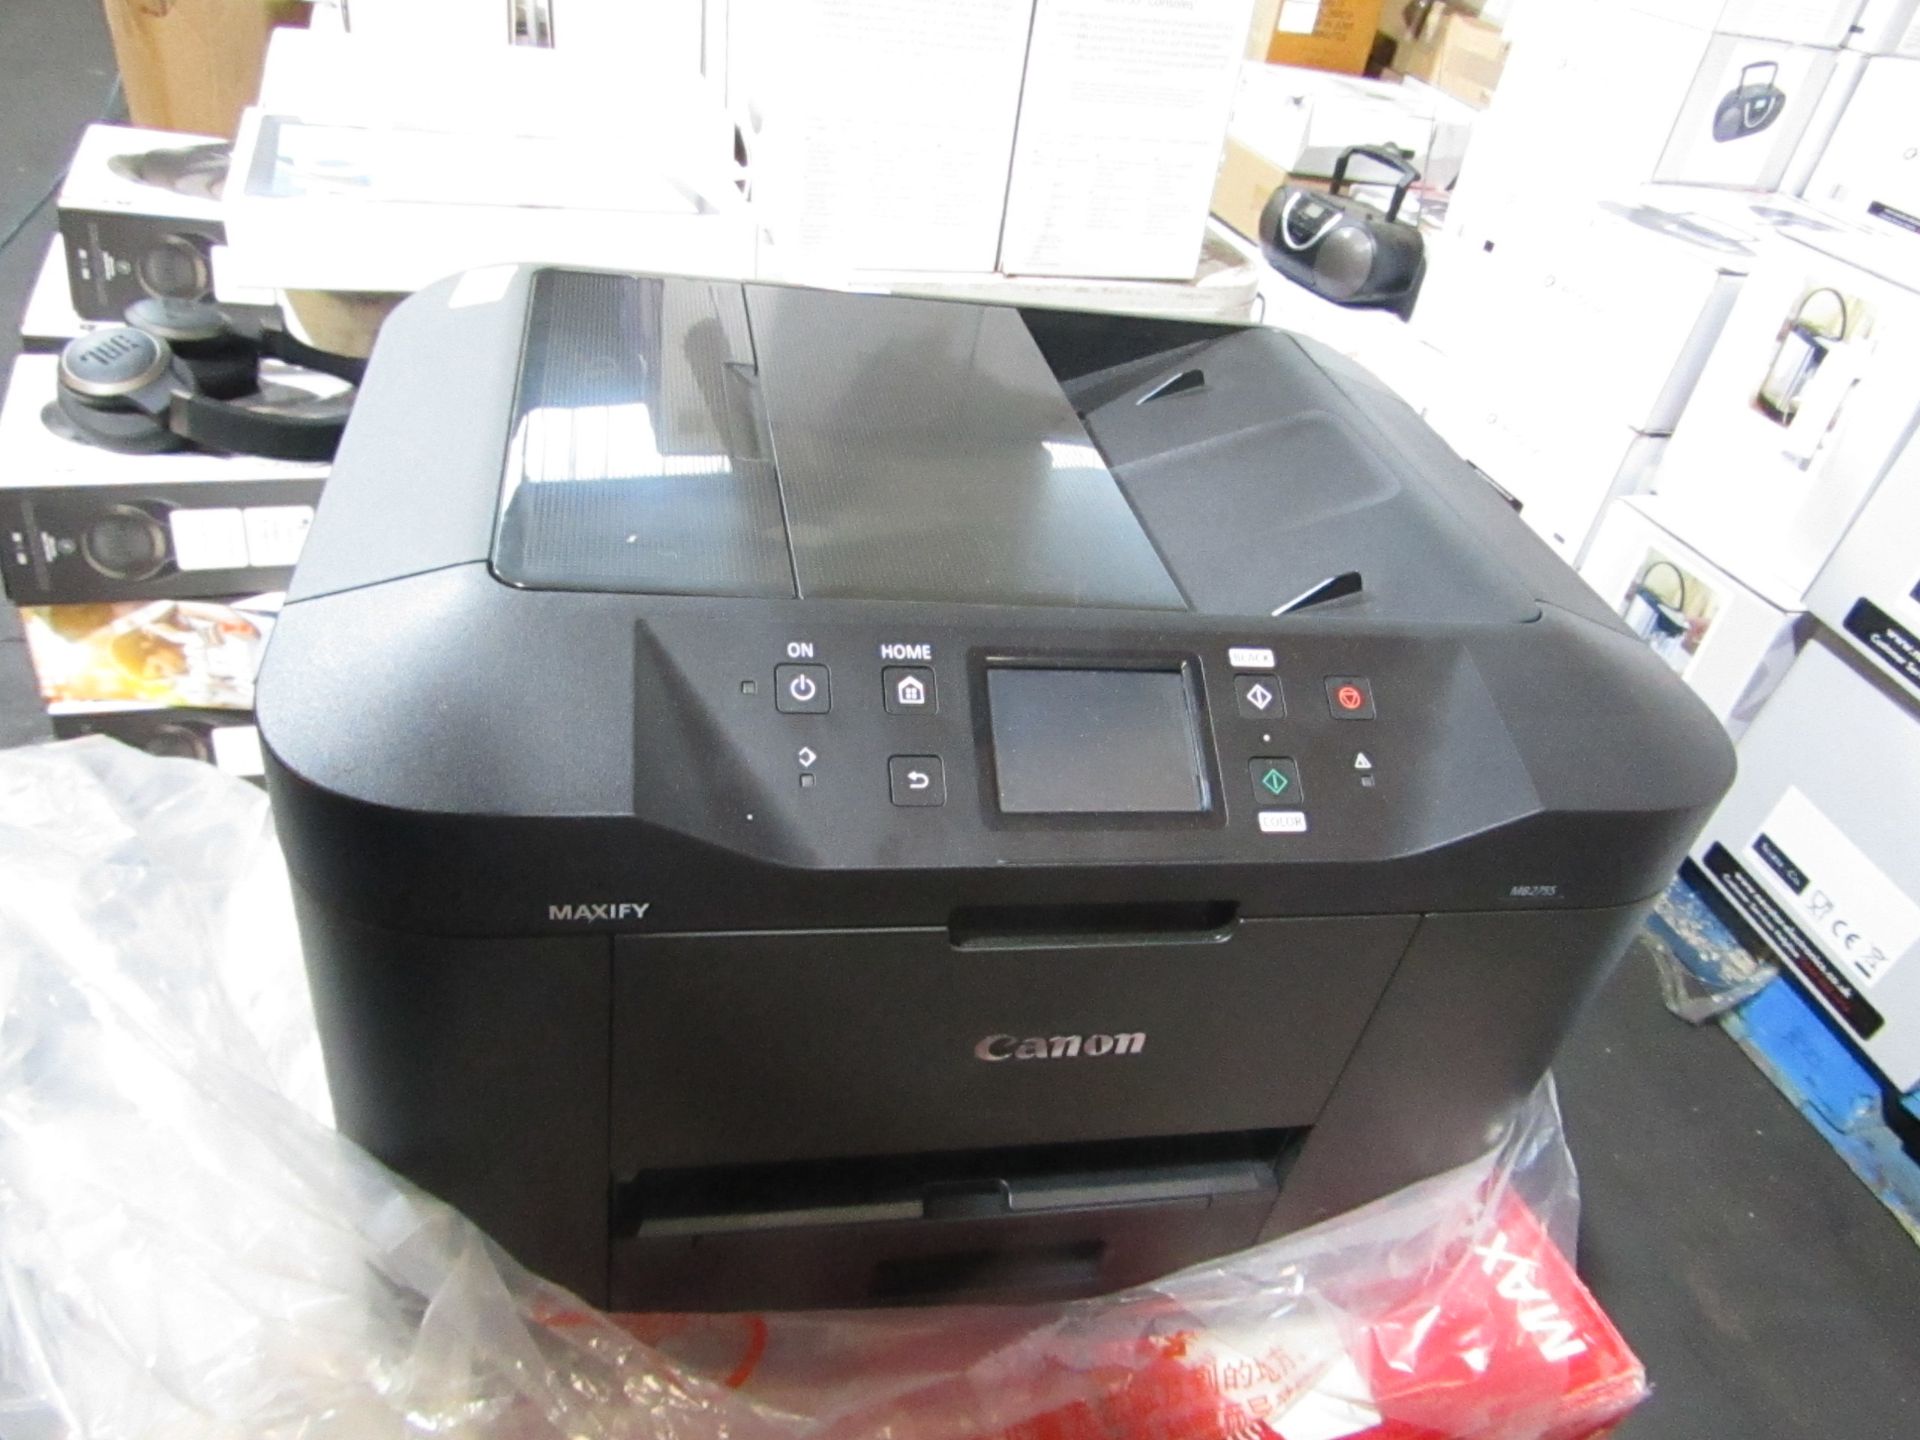 Canon Maxify MB2755 Wireless Print Copoy Scan Fax Colour Printer boxed powers on (no cartridges)